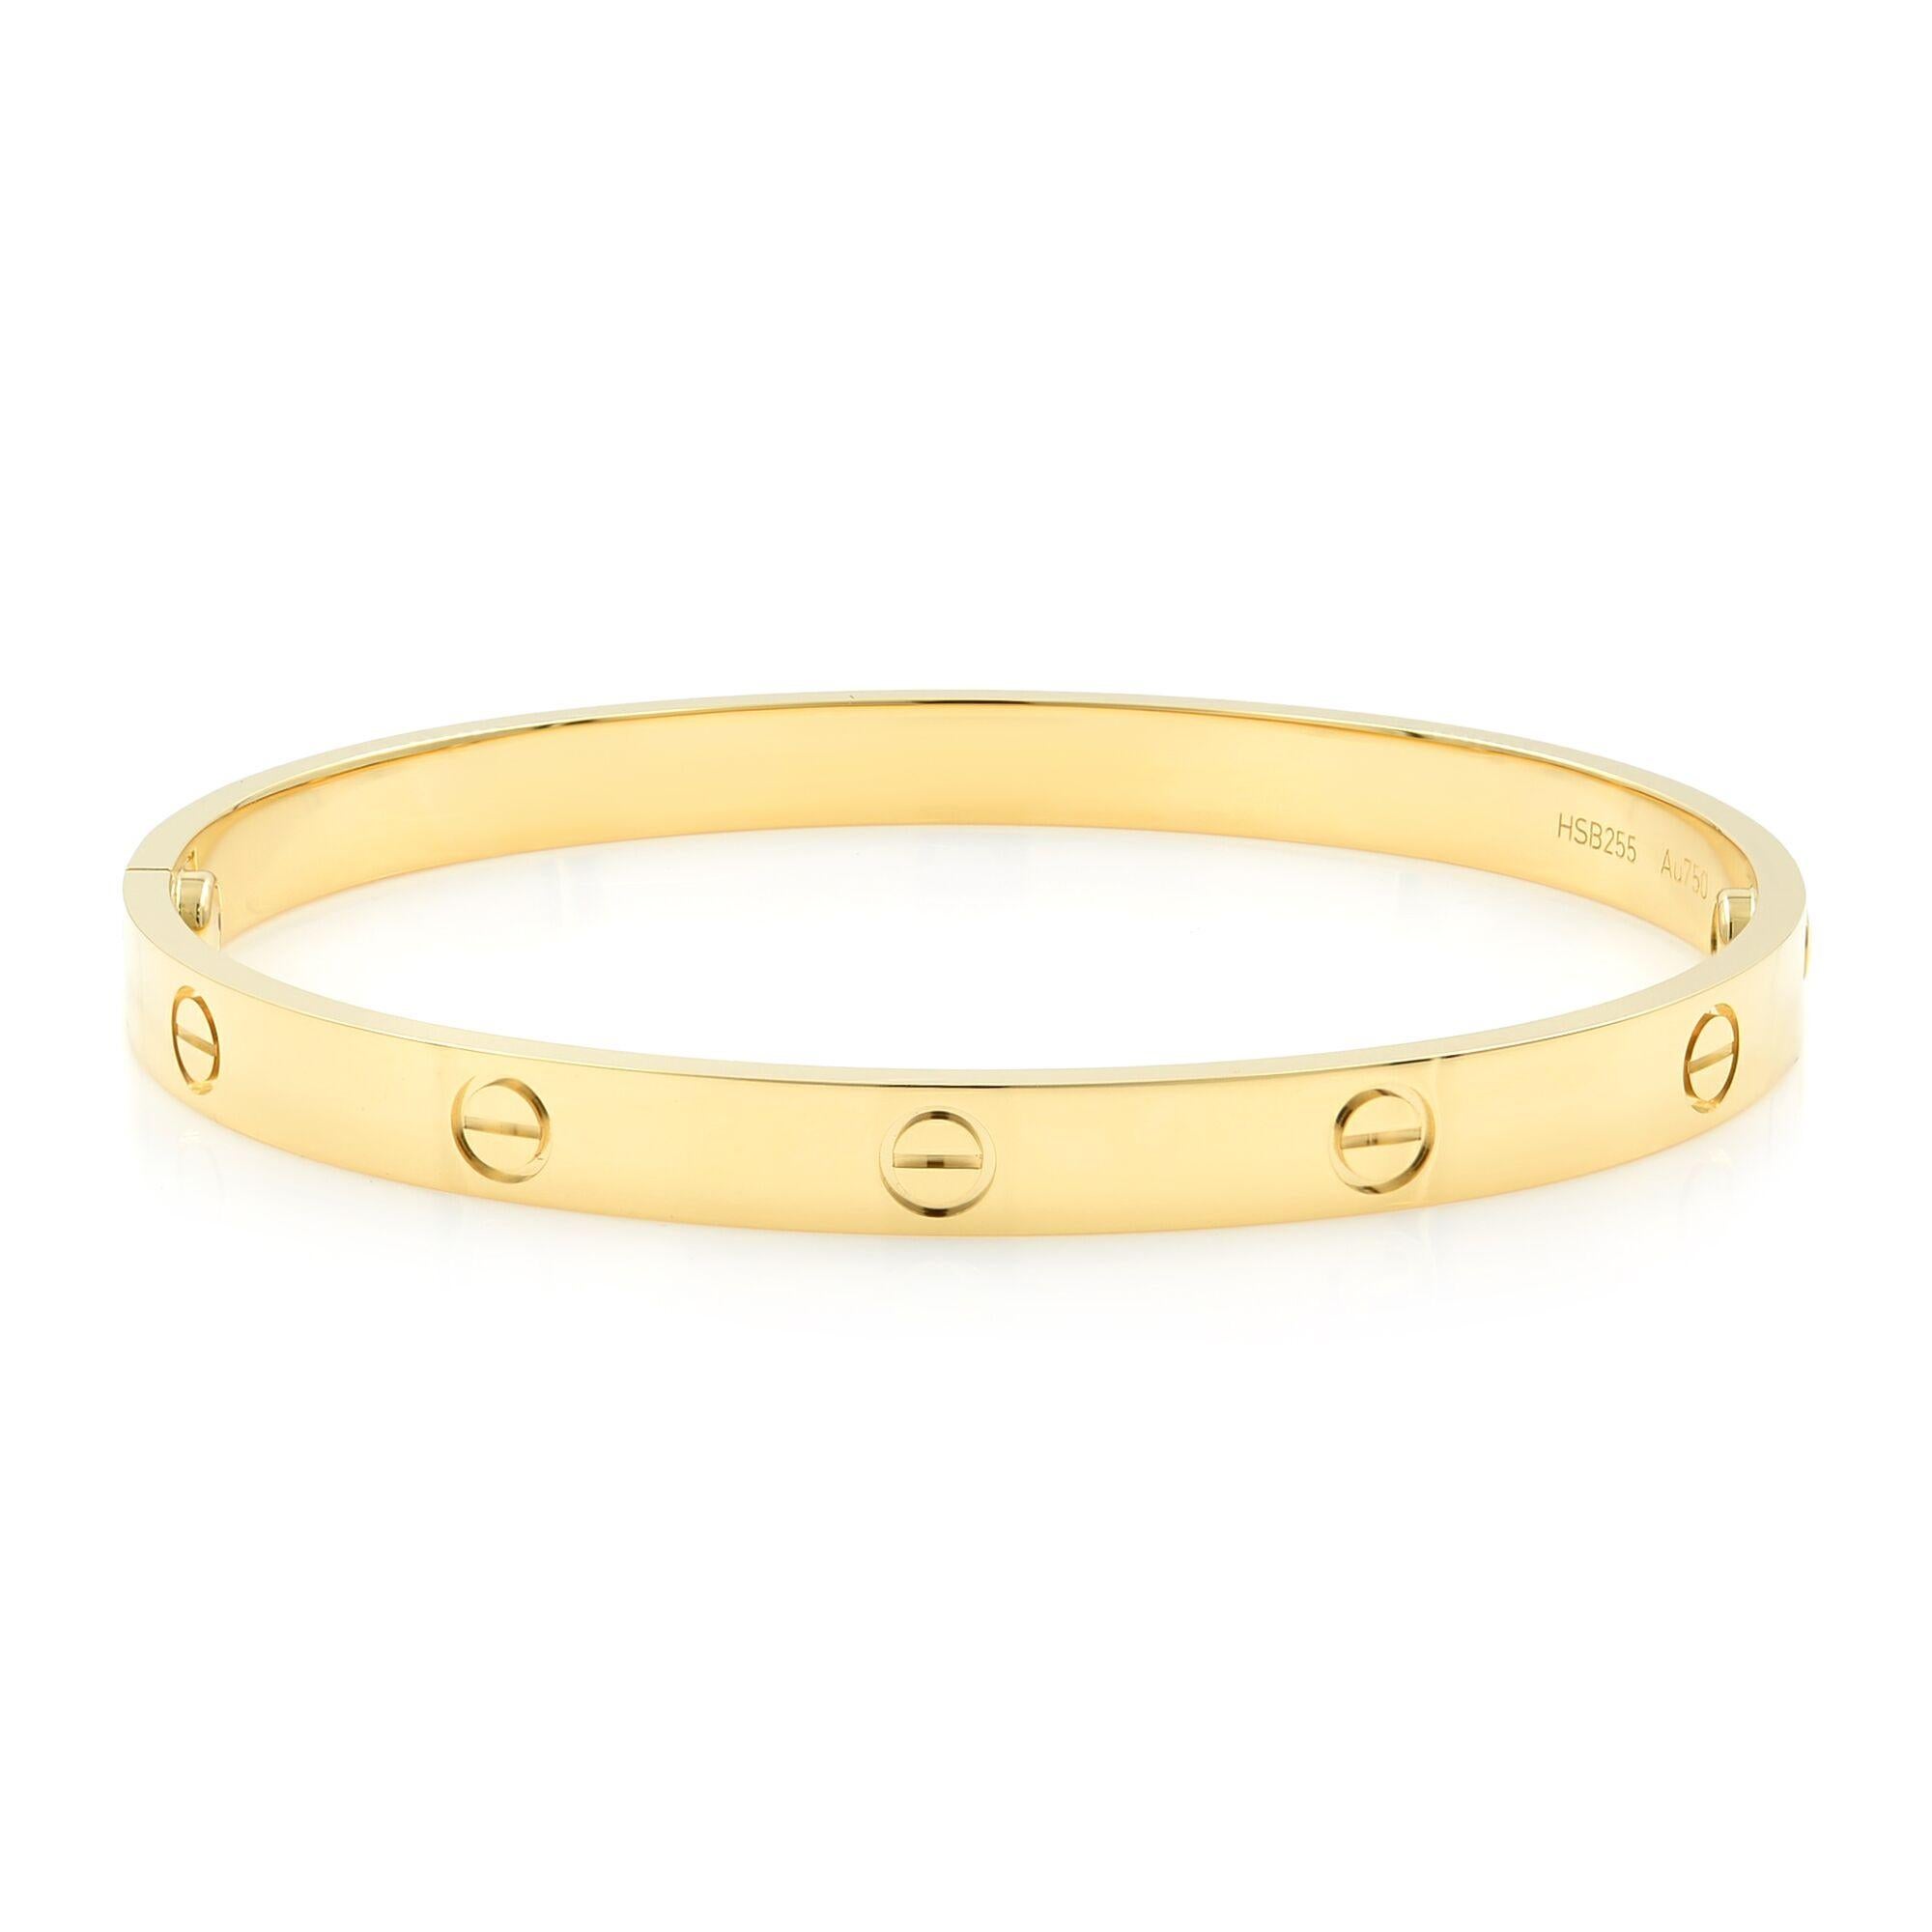 Cartier Love Bracelet Size 20 18K Yellow Gold.
Authentic and beautiful with no signs of wear. This bangle is a statement of luxury and class.
Comes with screwdriver, box and papers.
The bracelet is marked 